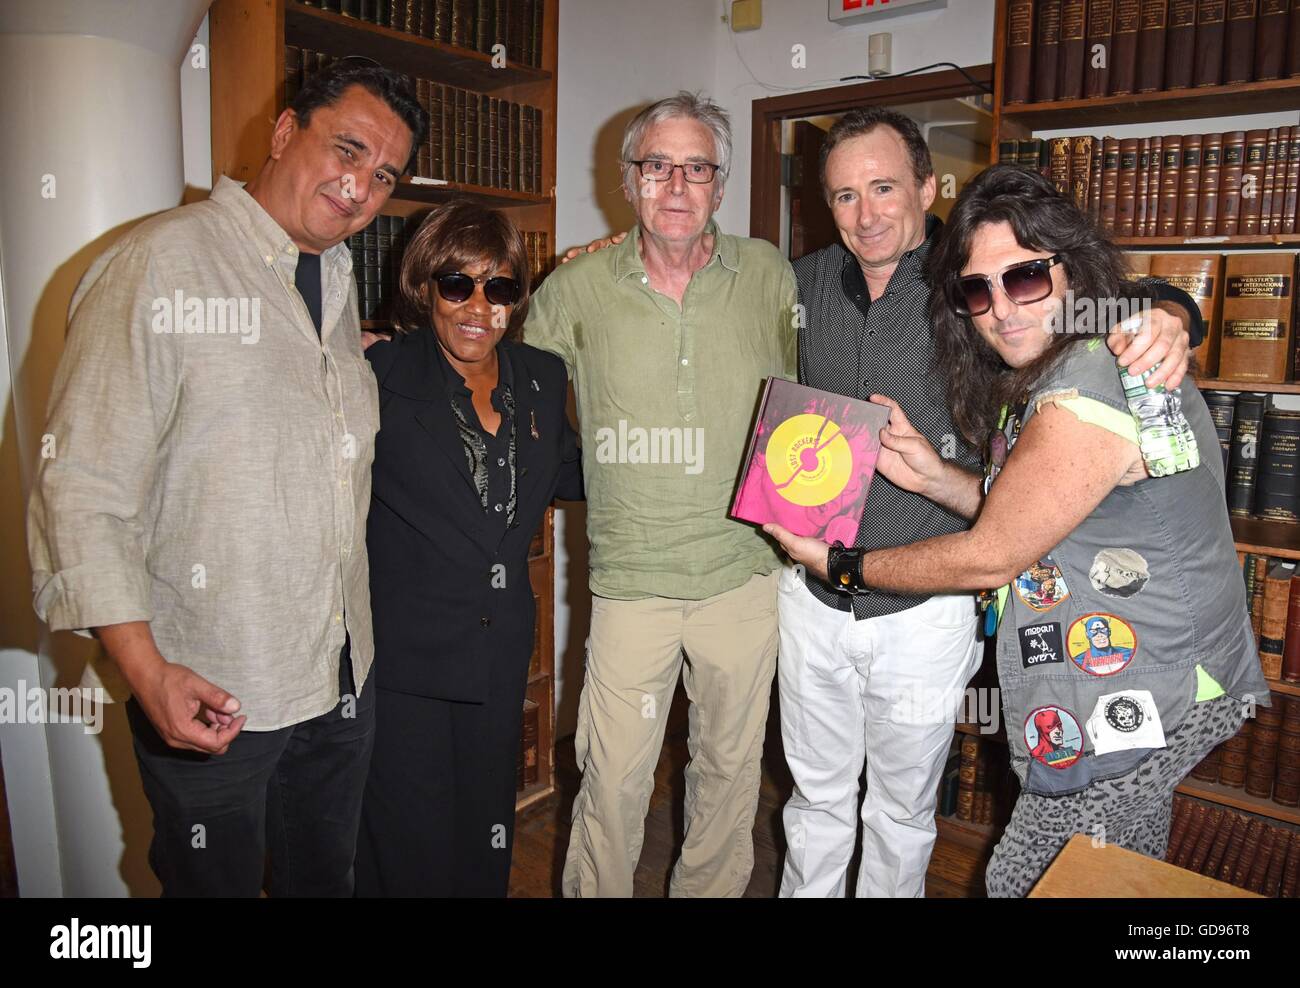 New York, NY, USA. 14th July, 2016. Steven Bush, Gloria Jones, Jake Holmes, Paul Rachman, Tony Mann at in-store appearance for The Lost Rockers: Broken Dreams and Crashed Careers Book Release Event, Strand Bookstore, New York, NY July 14, 2016. Credit:  Derek Storm/Everett Collection/Alamy Live News Stock Photo